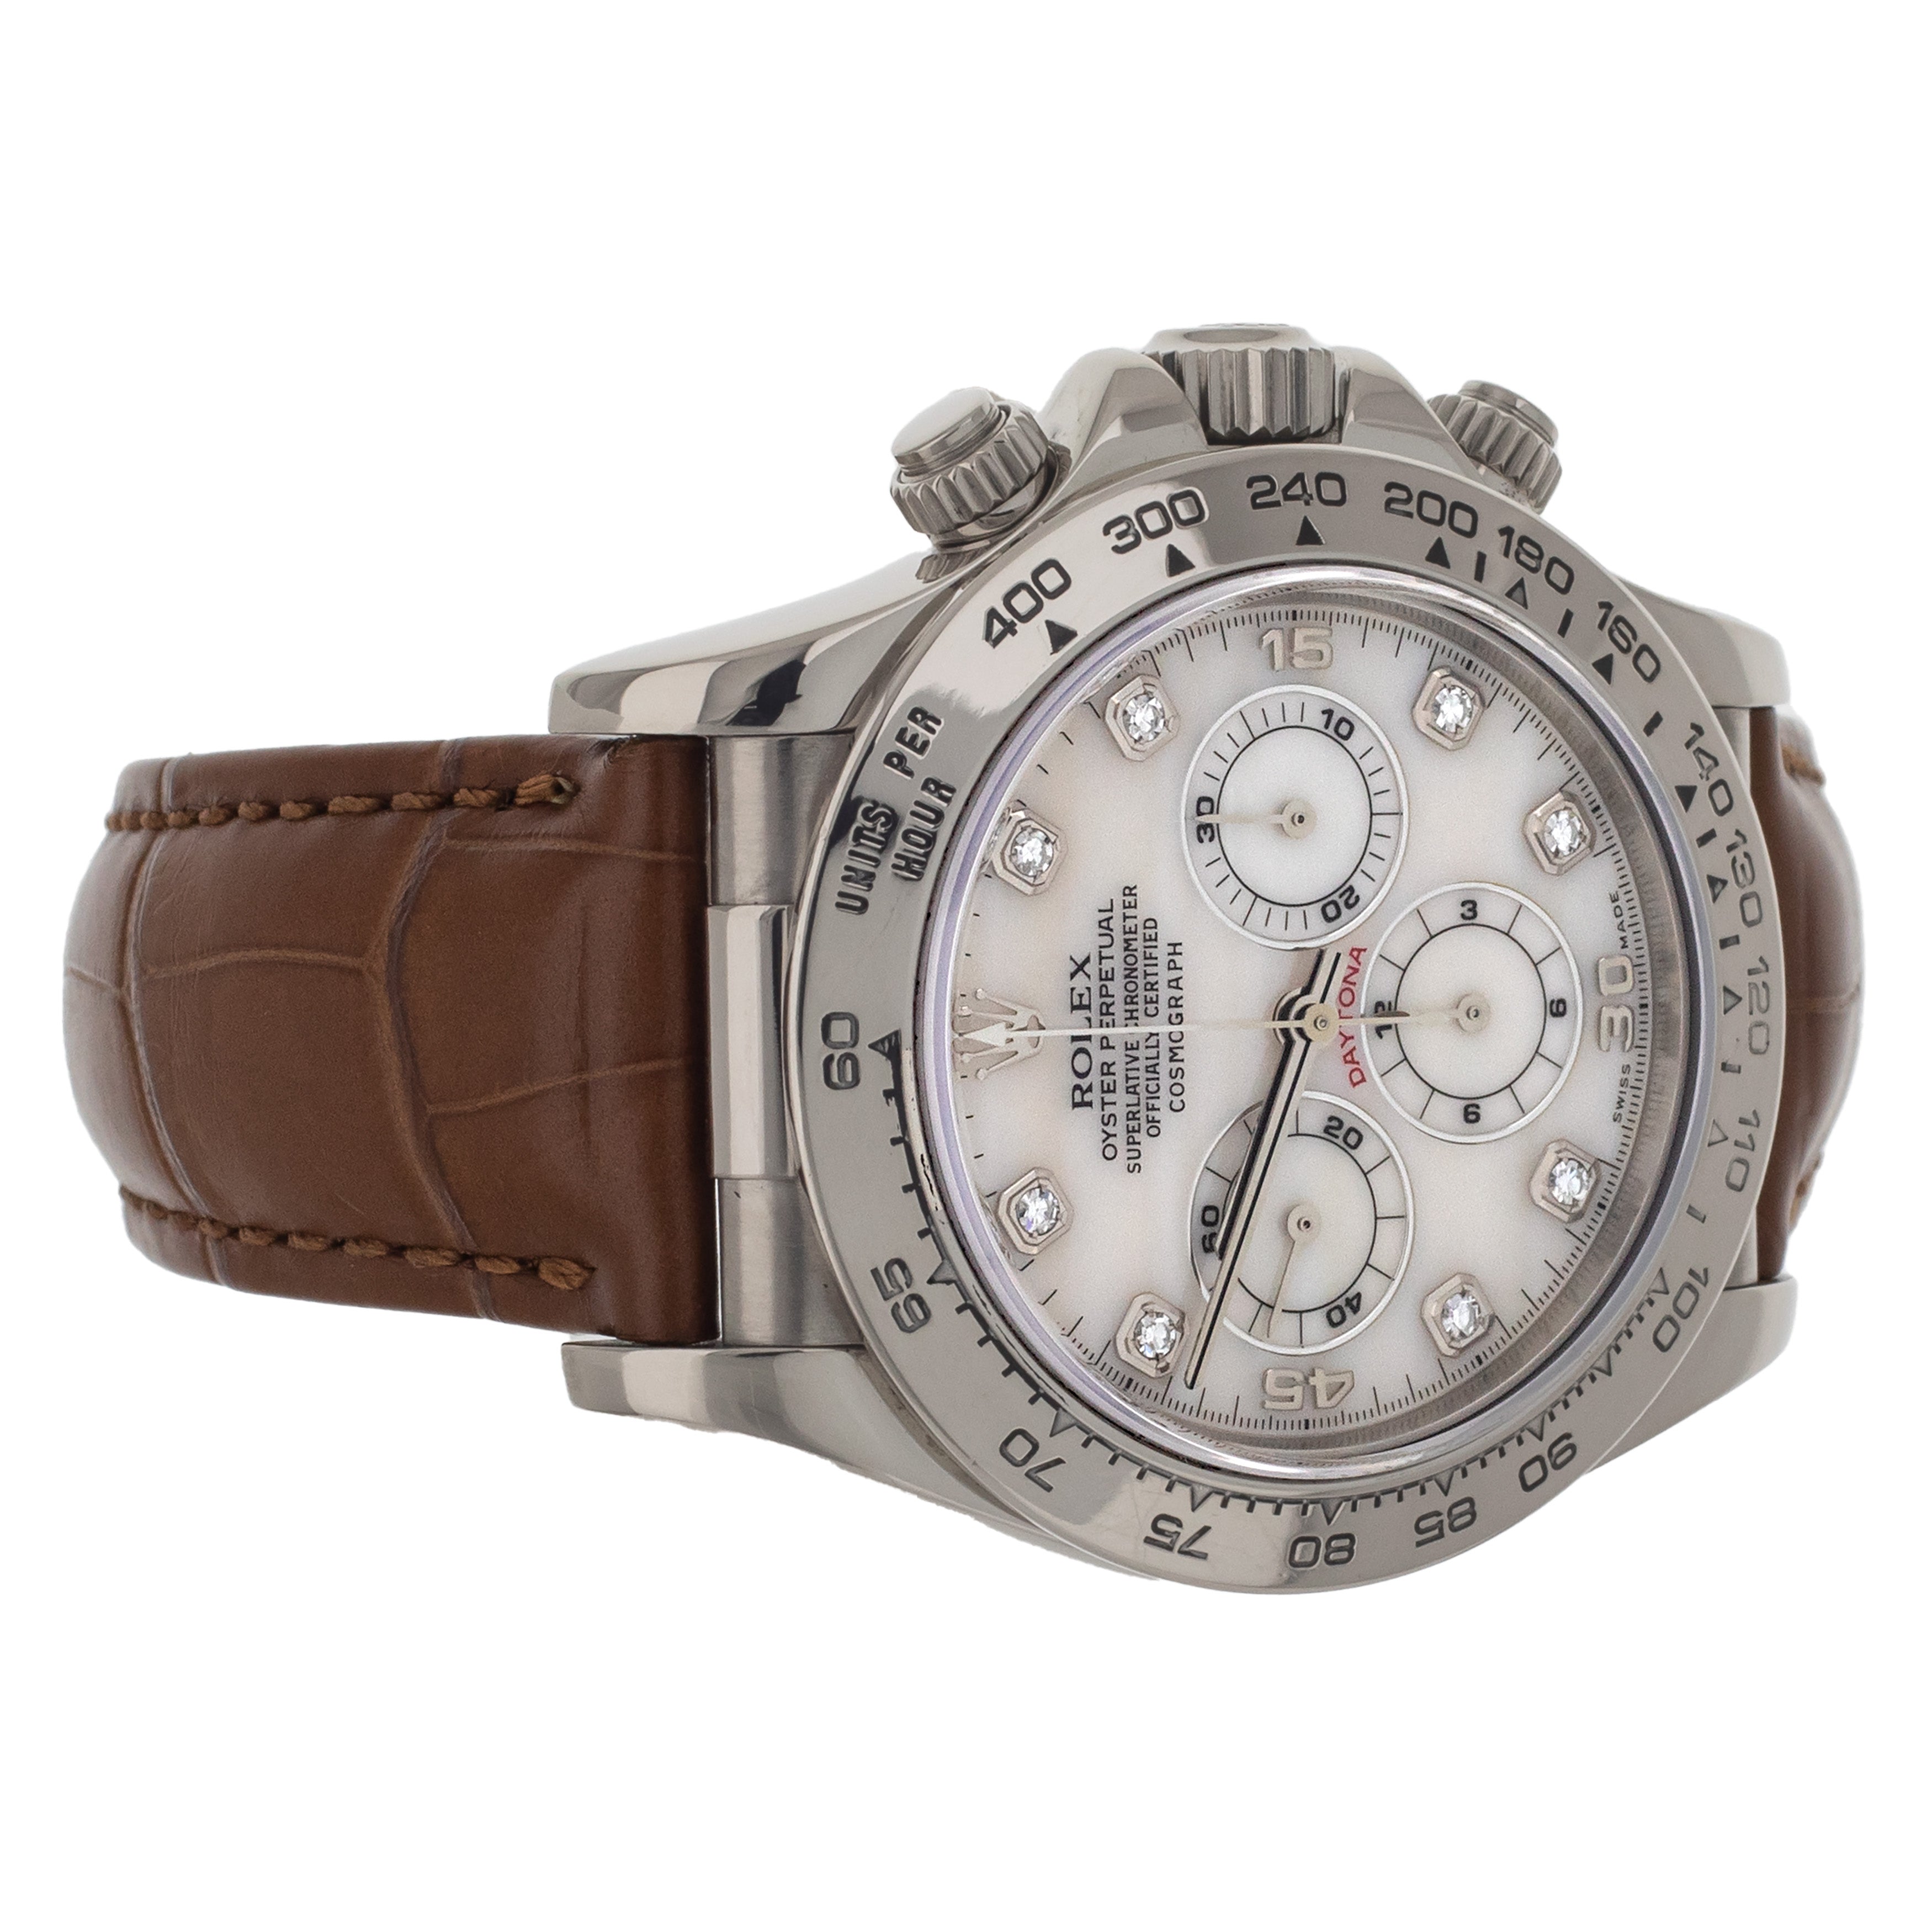 Rolex Daytona Chronograph Mother of Pearl Dial White Gold Alligator 40mm M16519